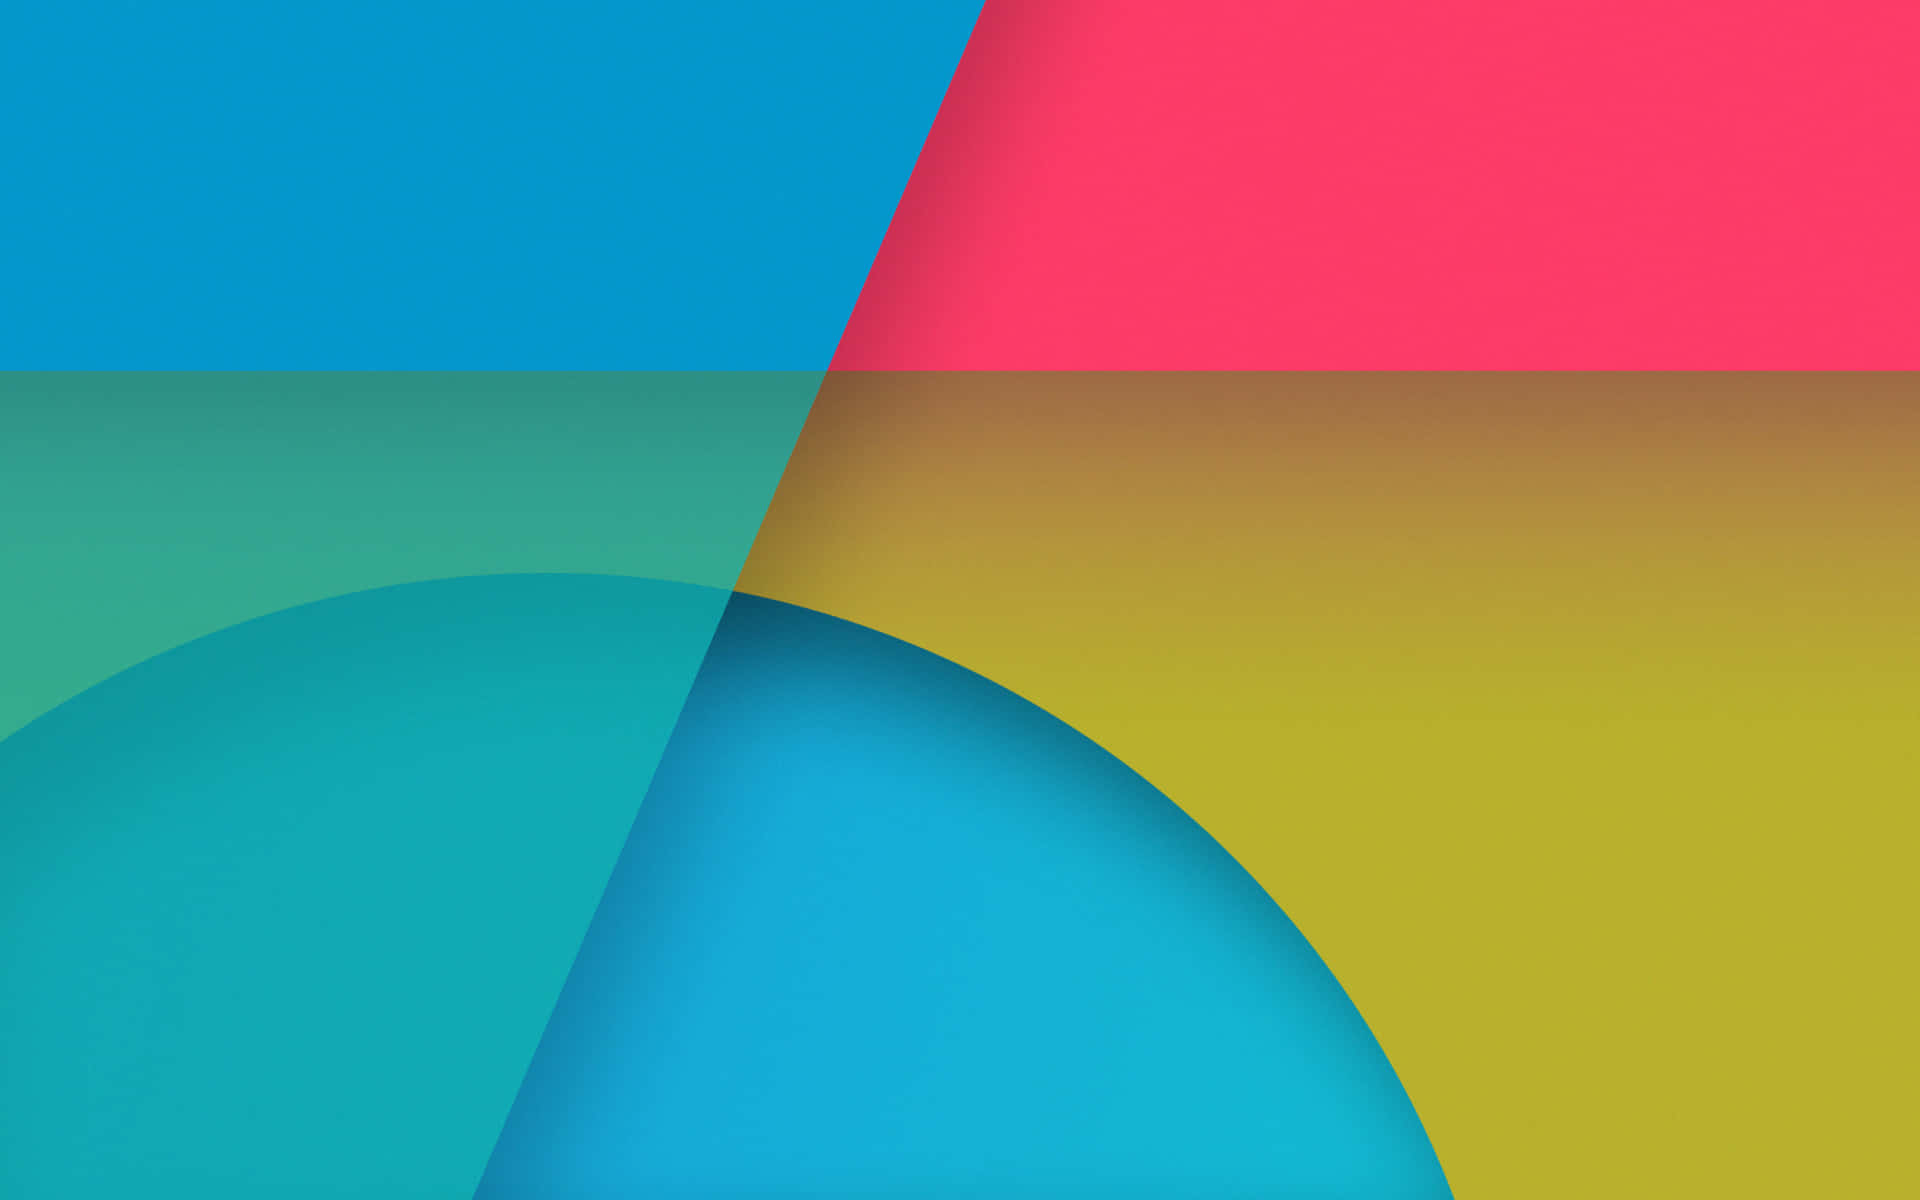 Stay connected with the latest Android phone from Google, the Nexus 5 Wallpaper